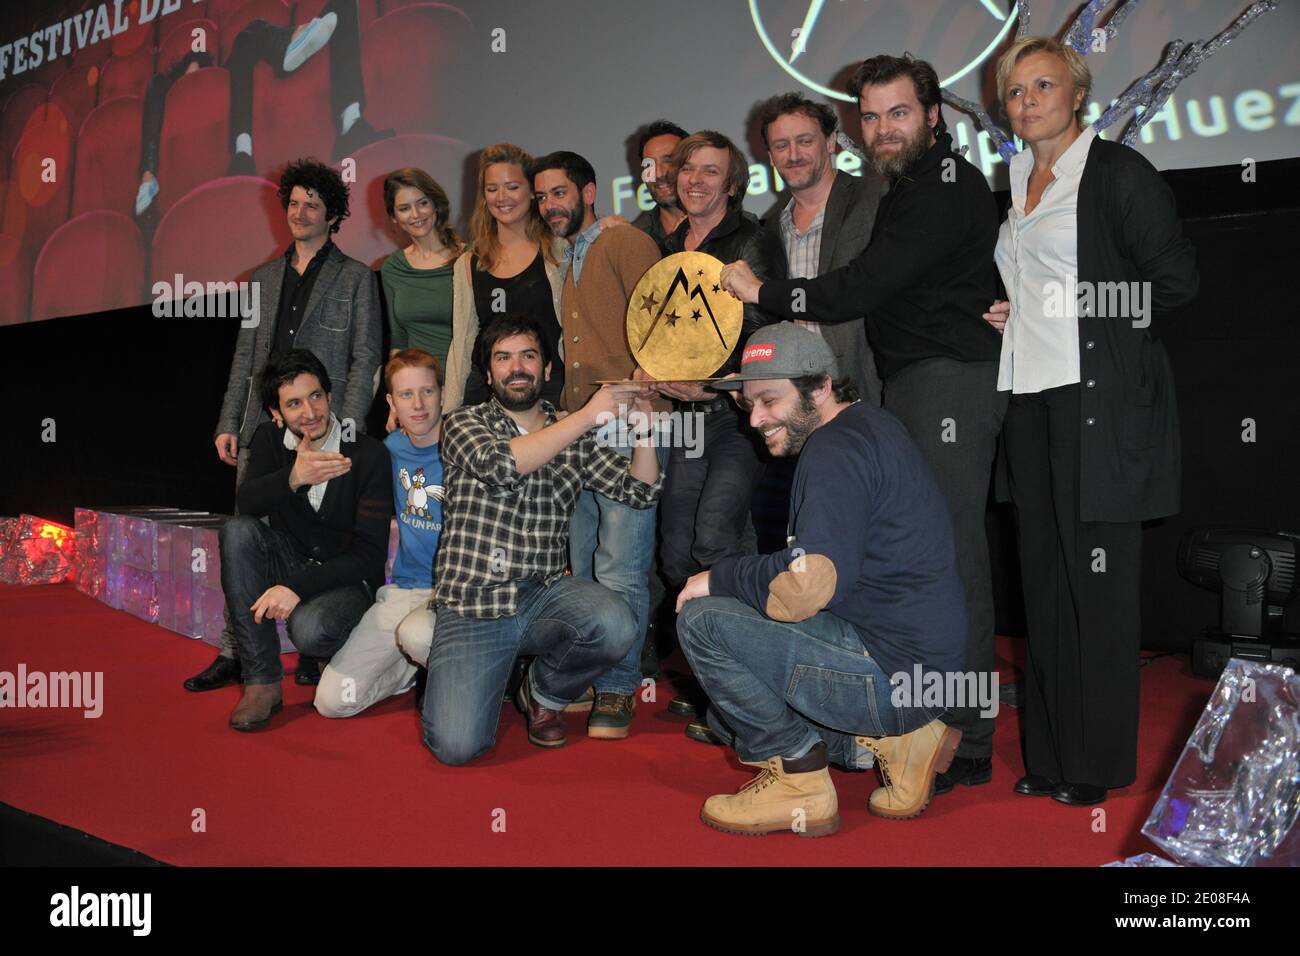 Radiostars' film crew Clovis Cornillac, Pascal Demolon, Come Levin, Douglas  Attal, Romain Levy and Manu Payet pose with Jury Gilles Lellouche, Alice  Taglioni, Muriel Robin, Virginie Efira, Jean-Paul Rouve and Clement Sibony